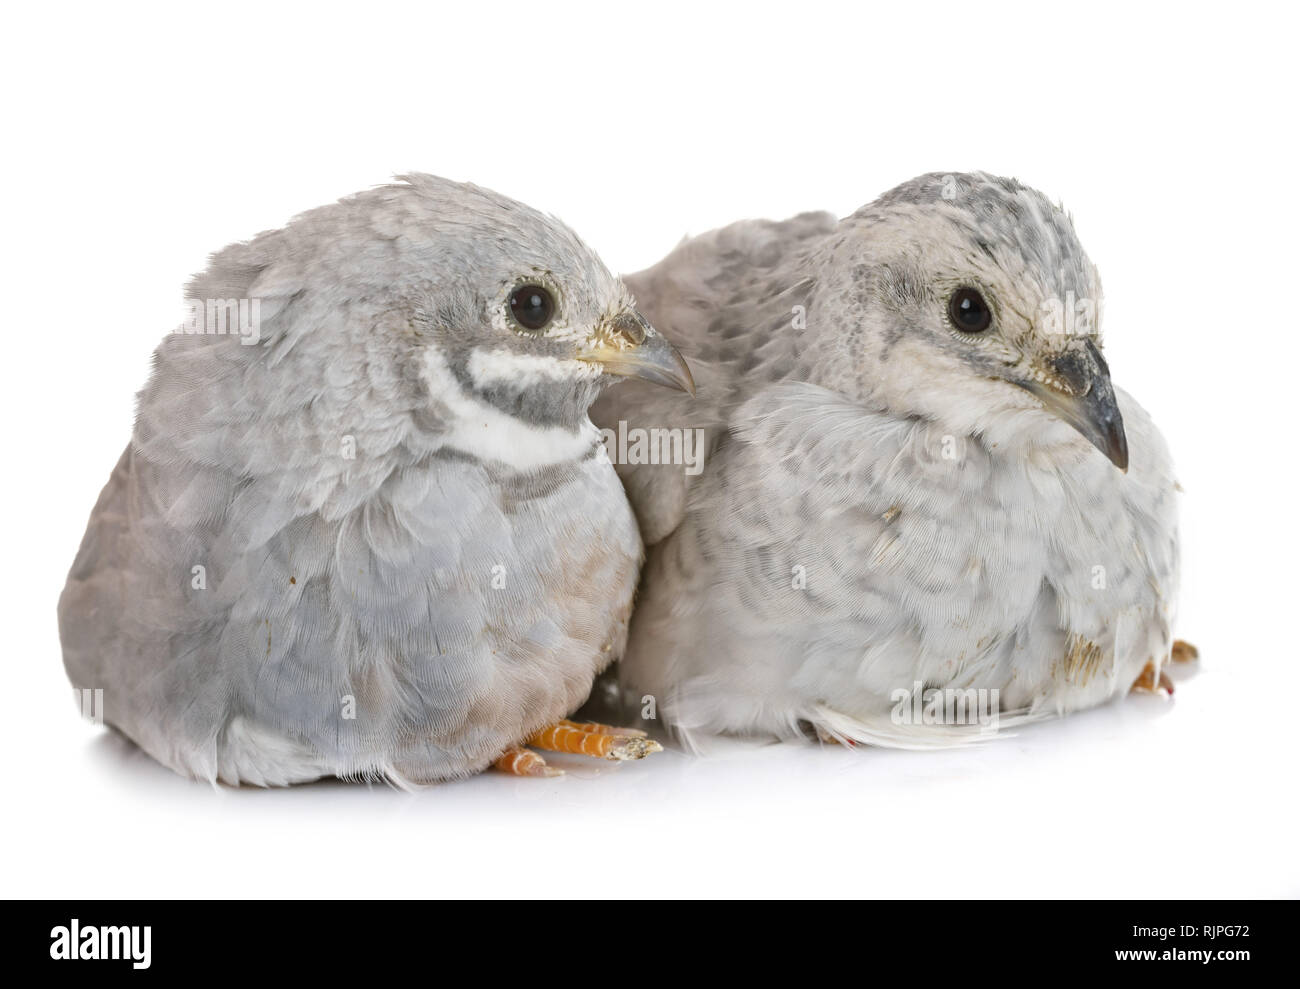 King quails in front of white background Stock Photo